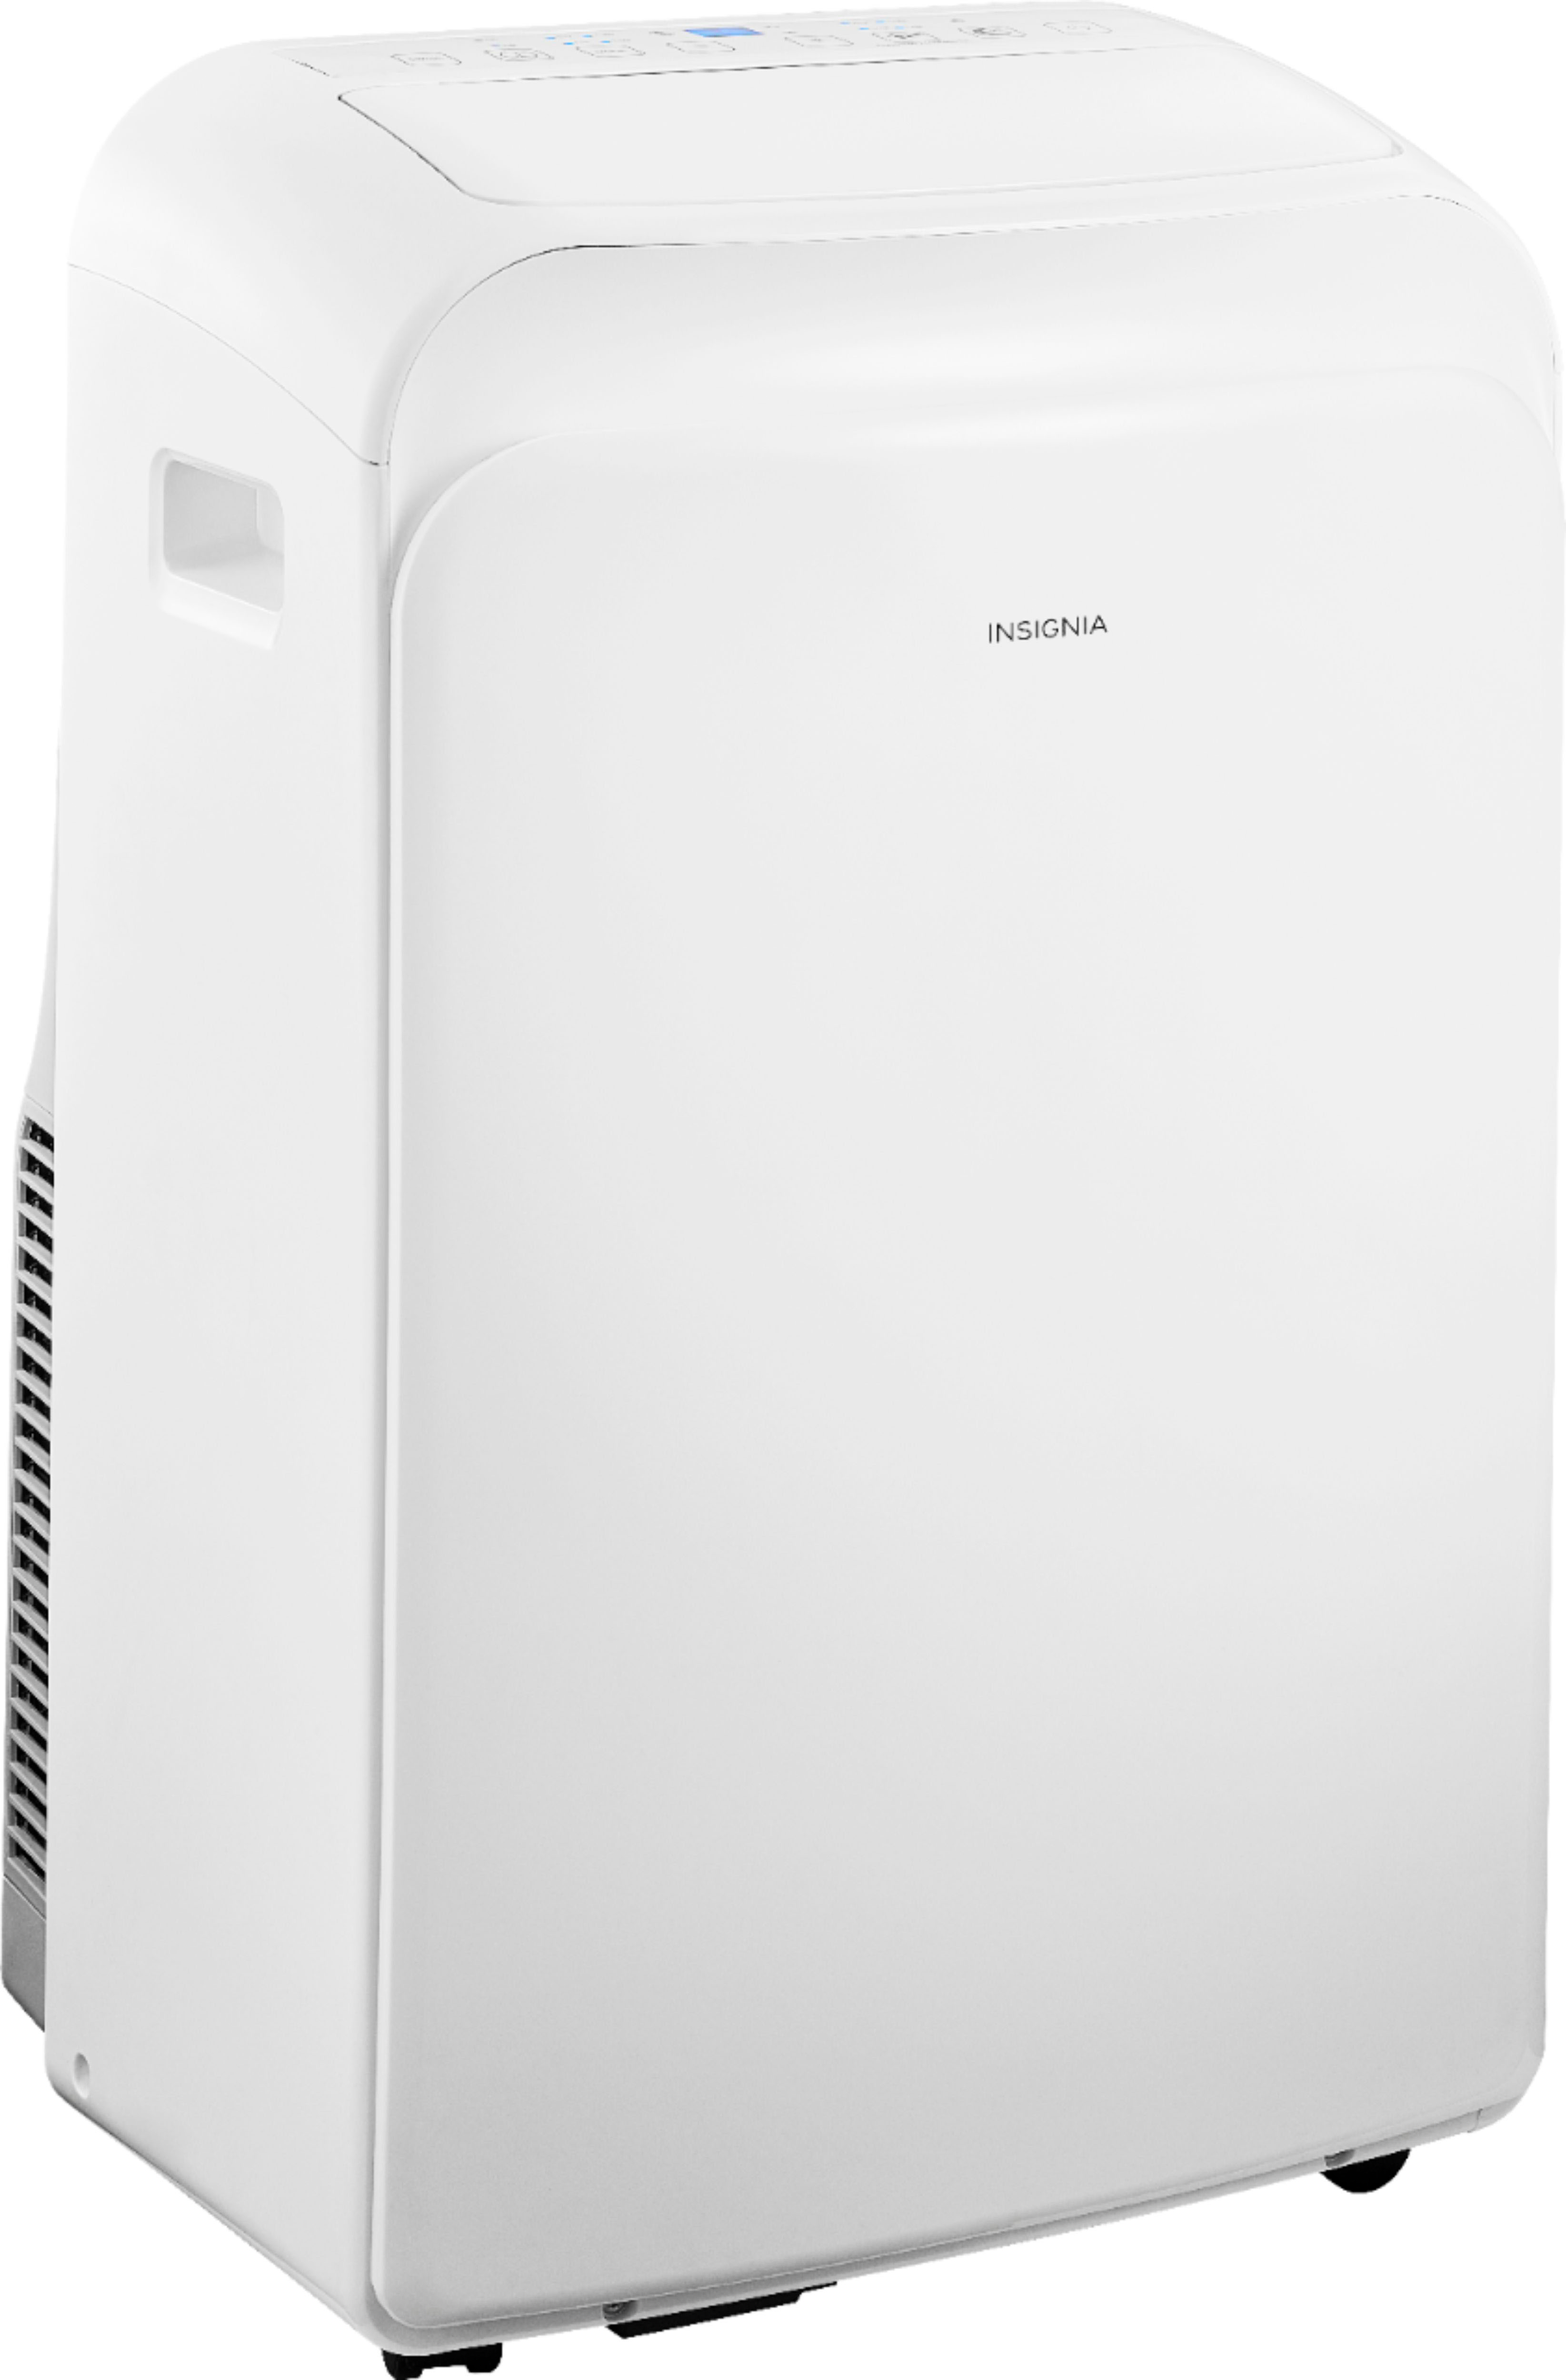 Angle View: GE - 550 Sq. Ft. 14,000 BTU Portable Air Conditioner with Remote - White